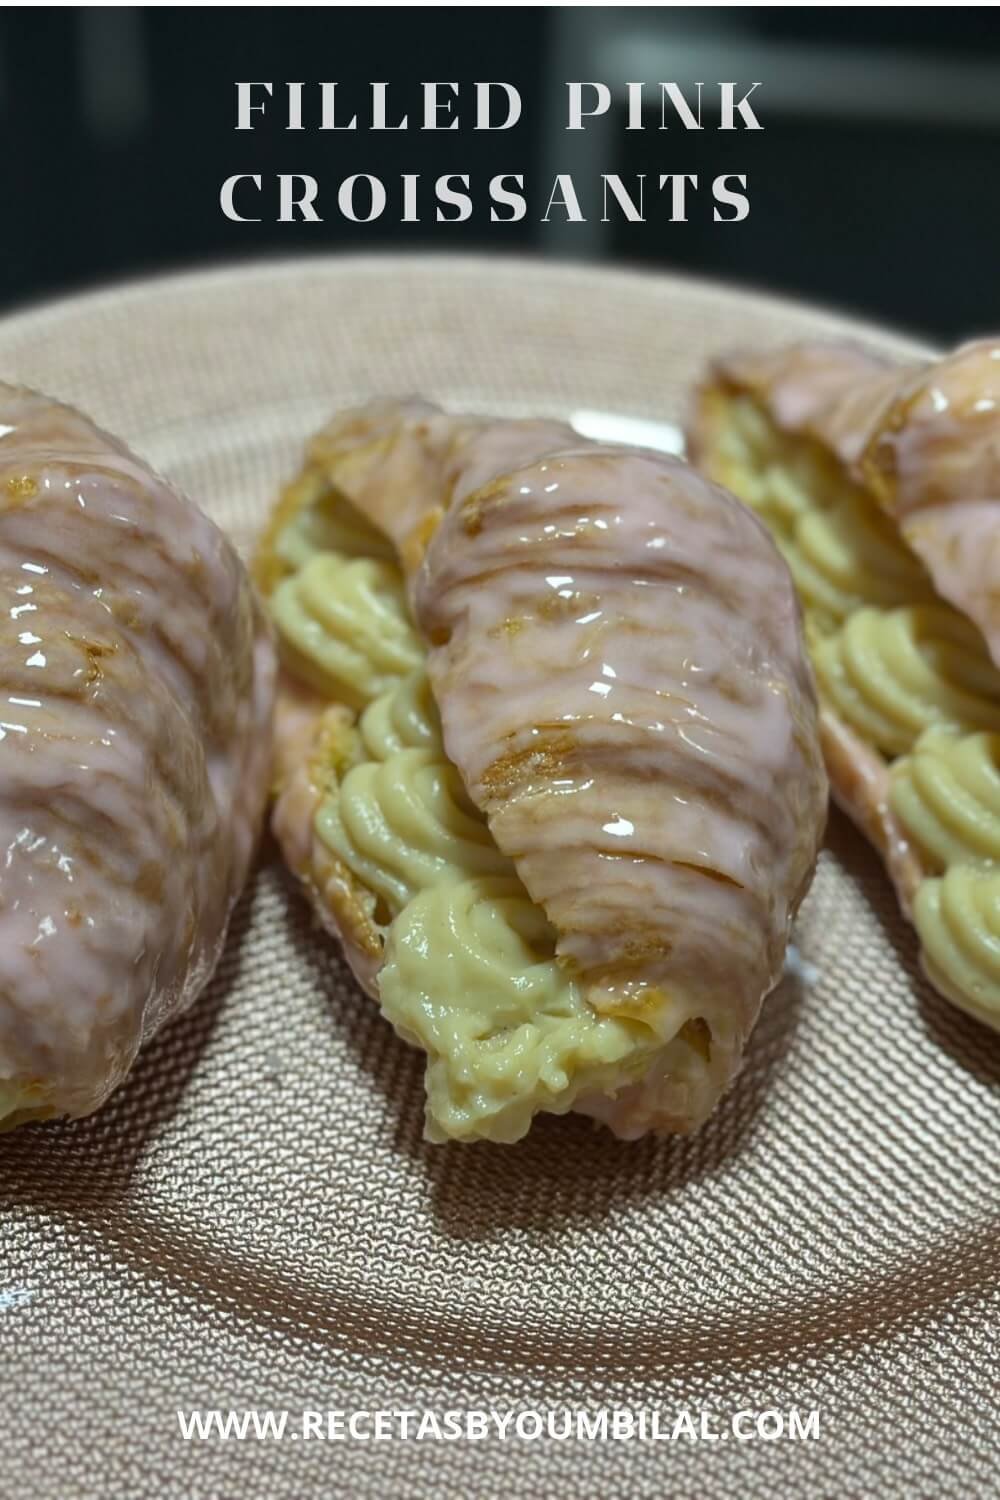 Croissants filled with pastry cream pinterest